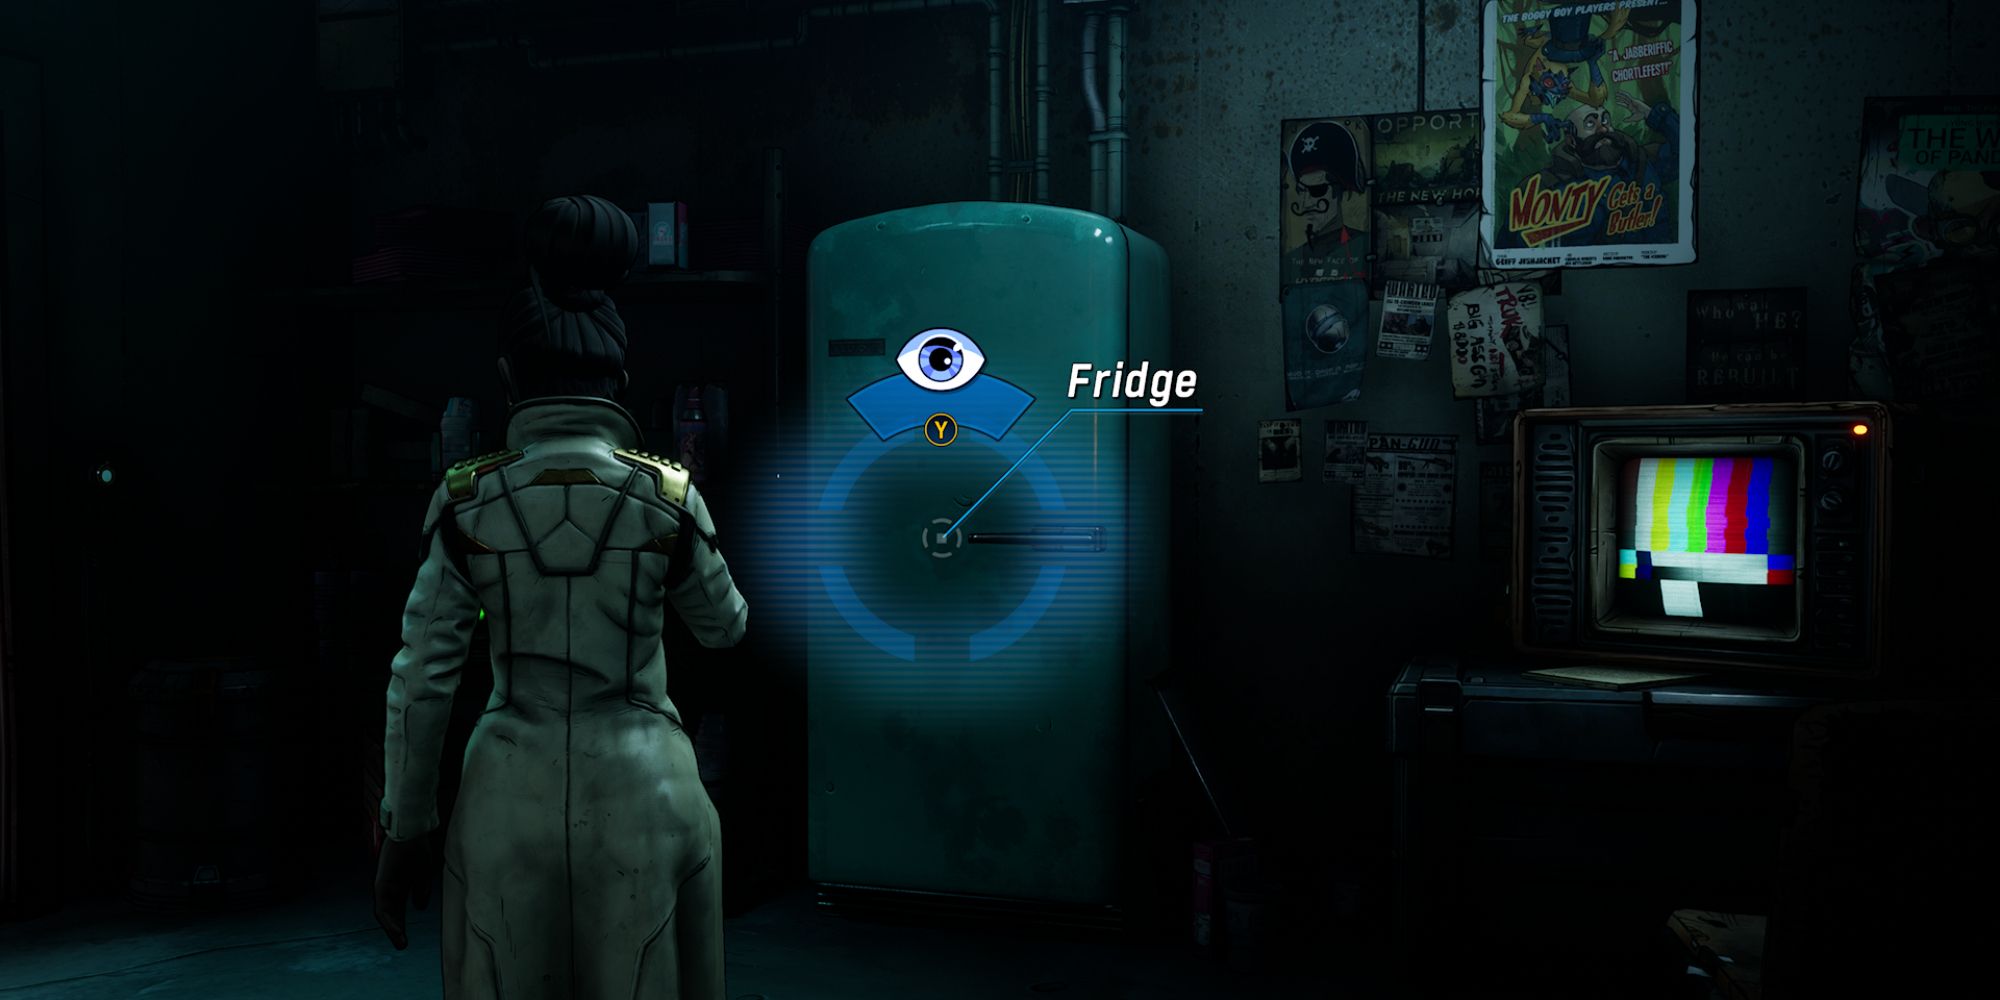 New Tales From The Borderlands Screenshot Of Anu In front Of Fridge